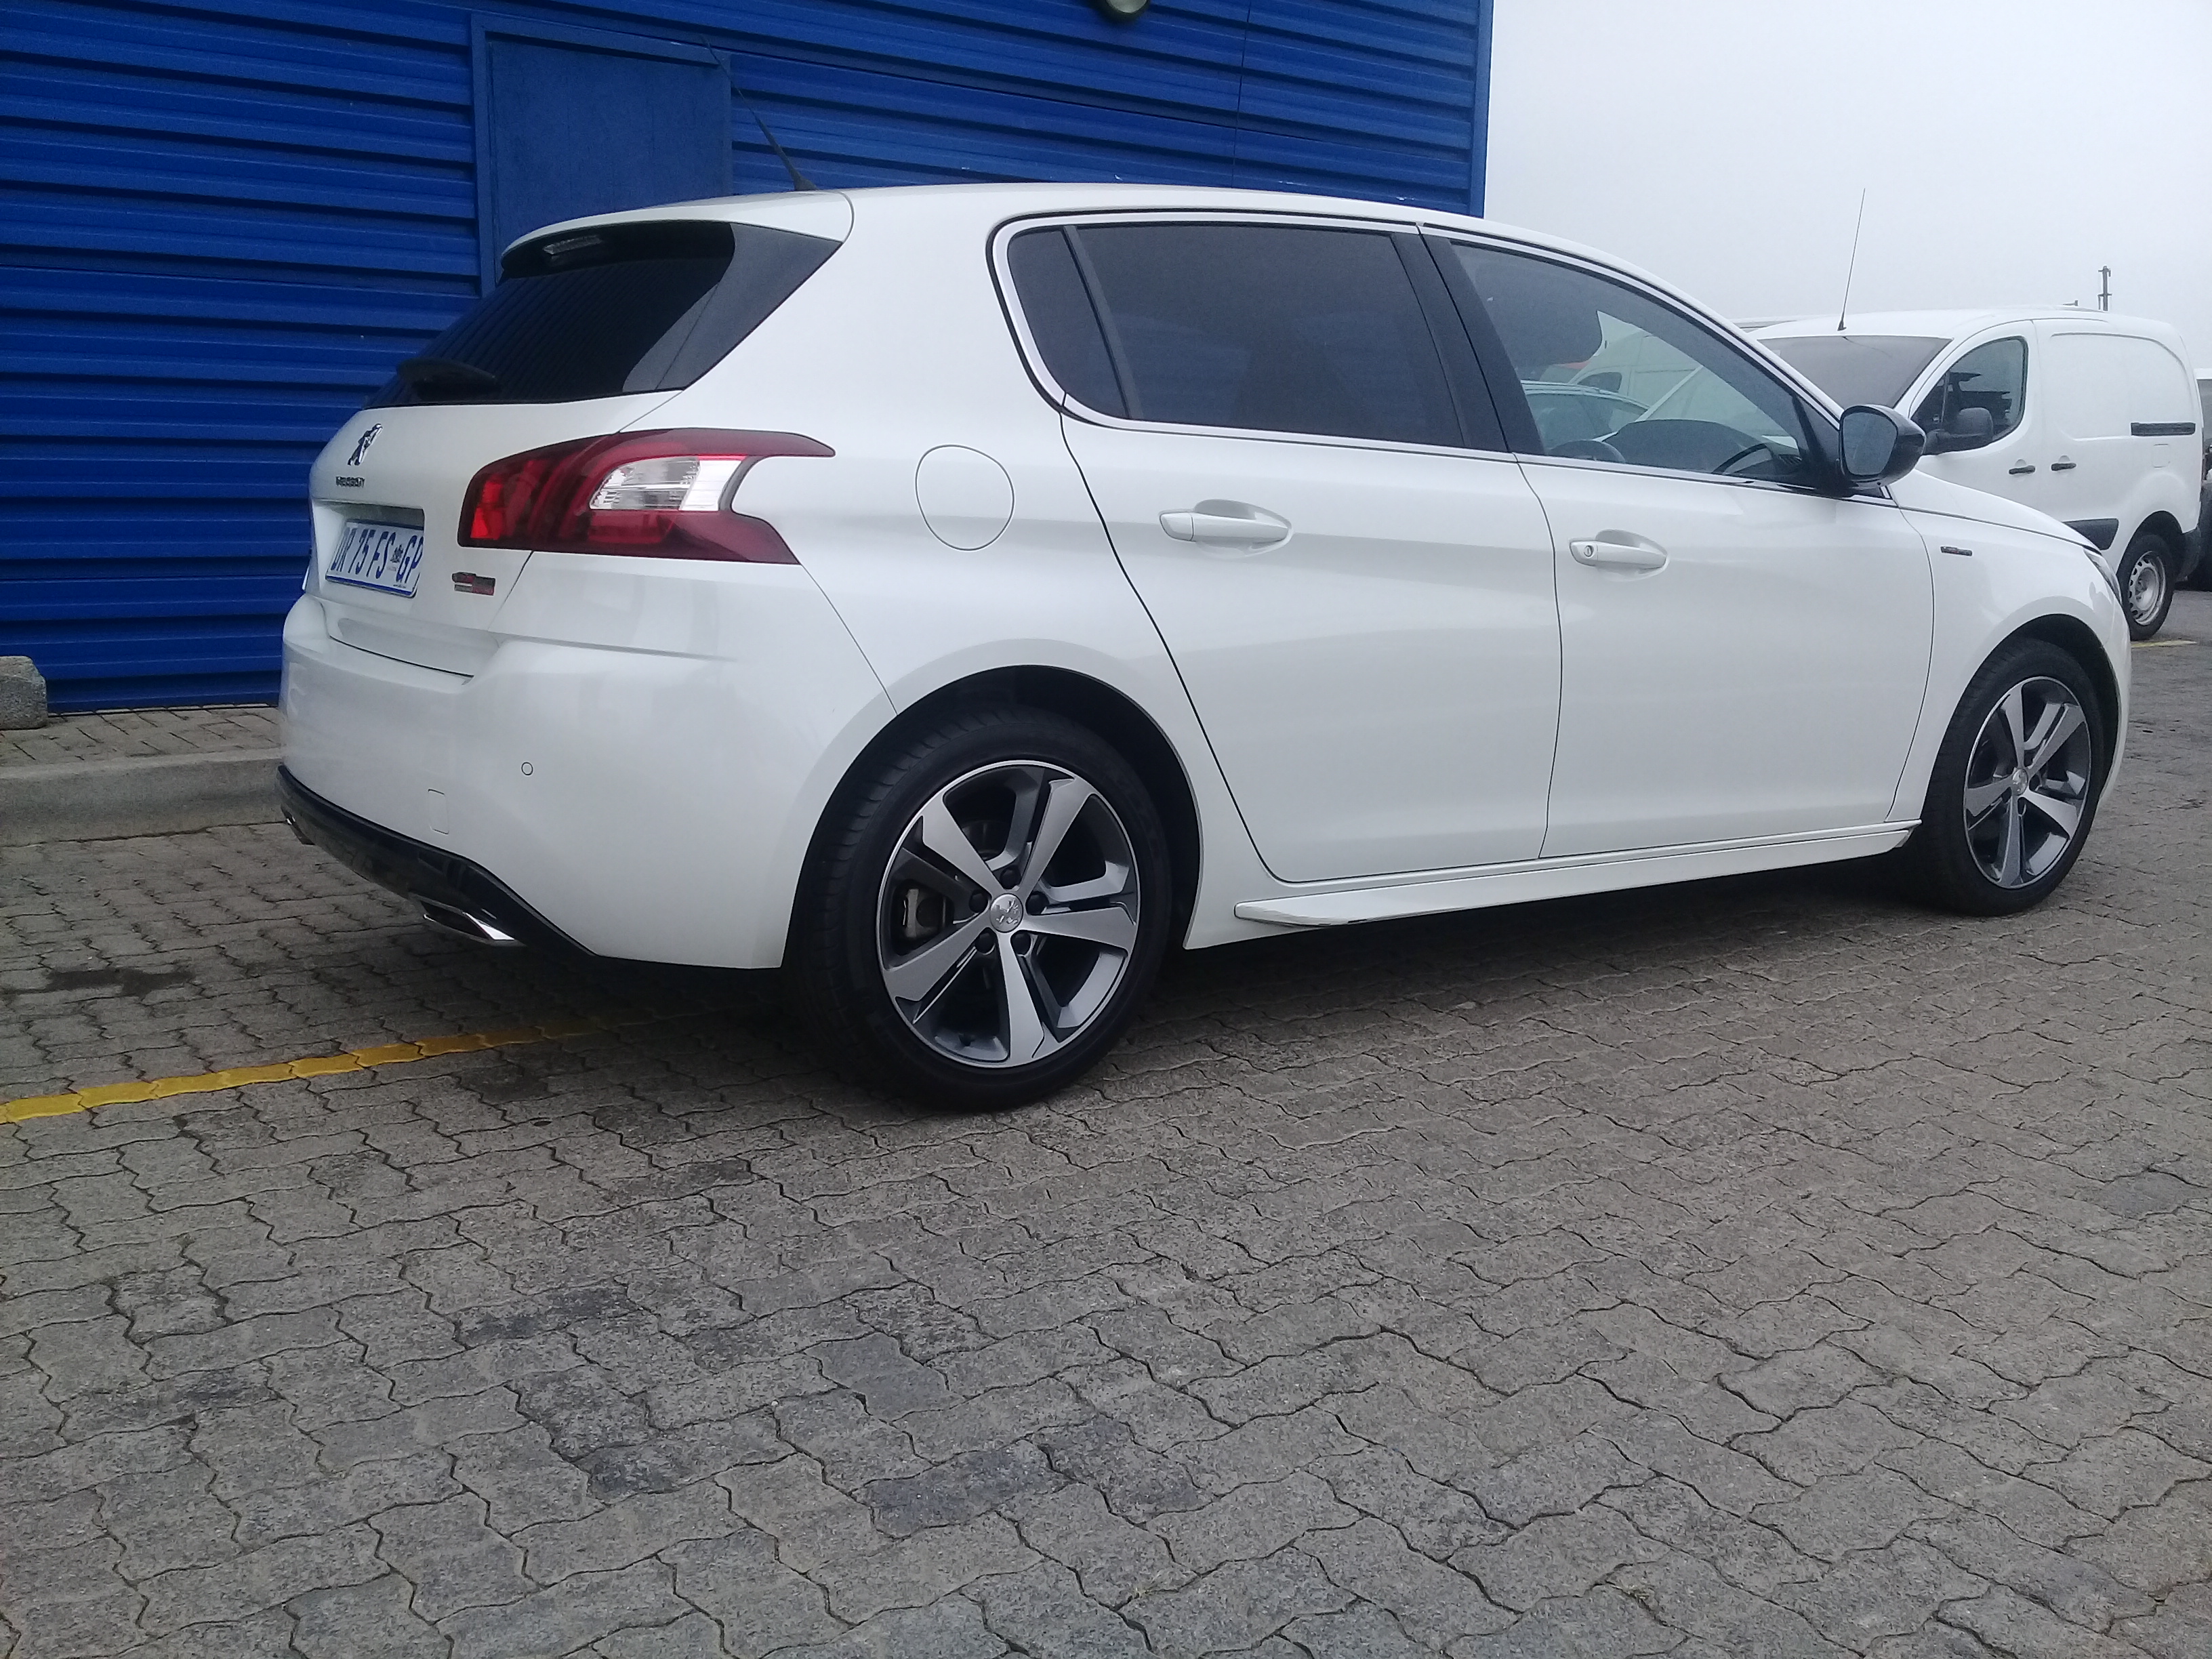 Peugeot 308 GT accessories restyling